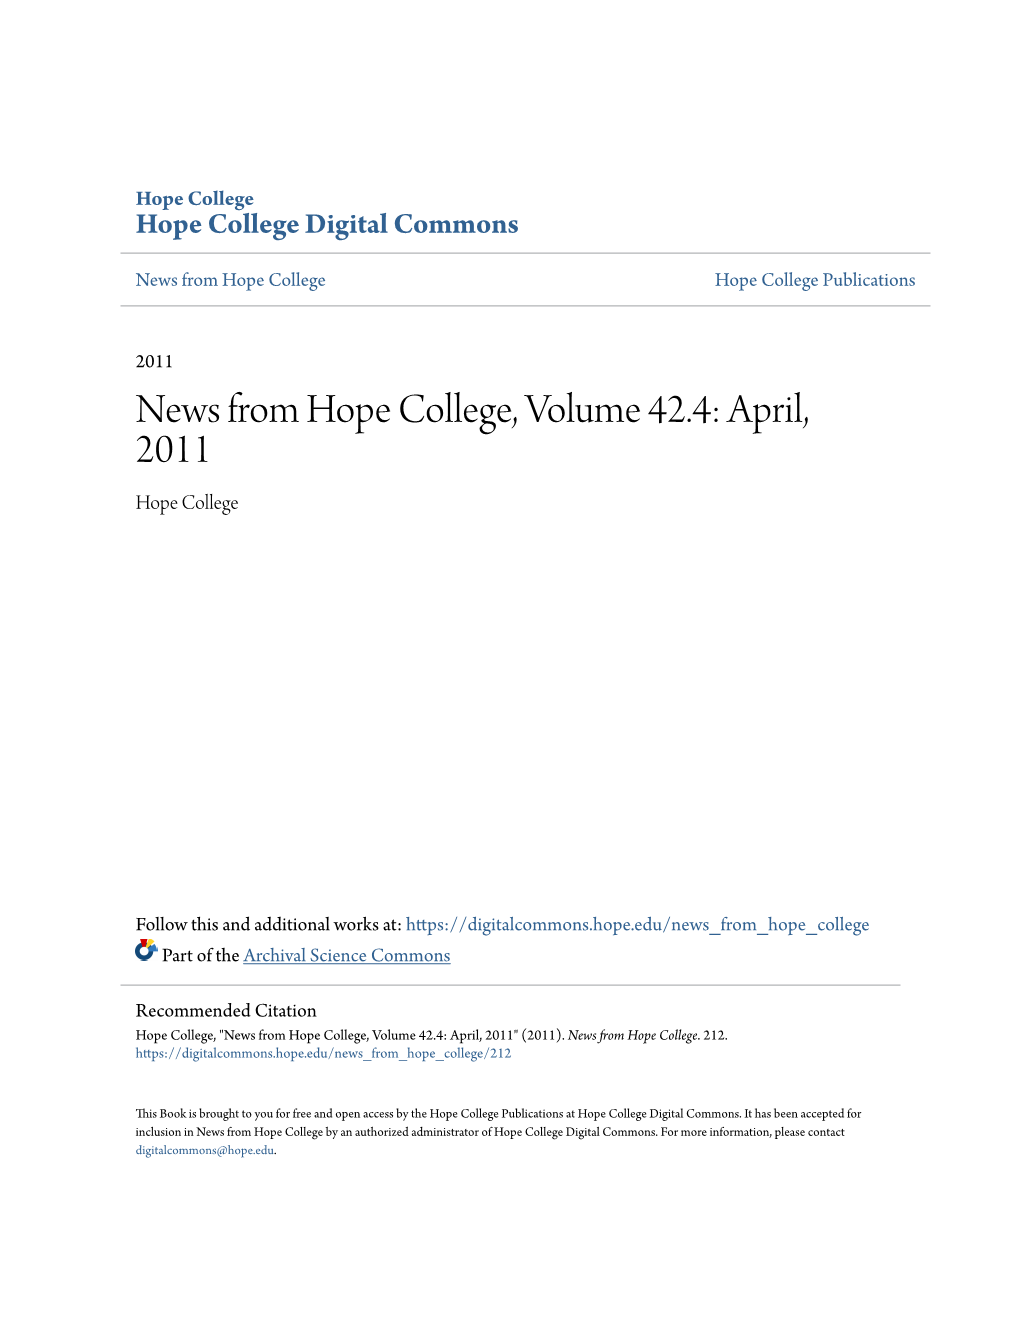 News from Hope College, Volume 42.4: April, 2011 Hope College